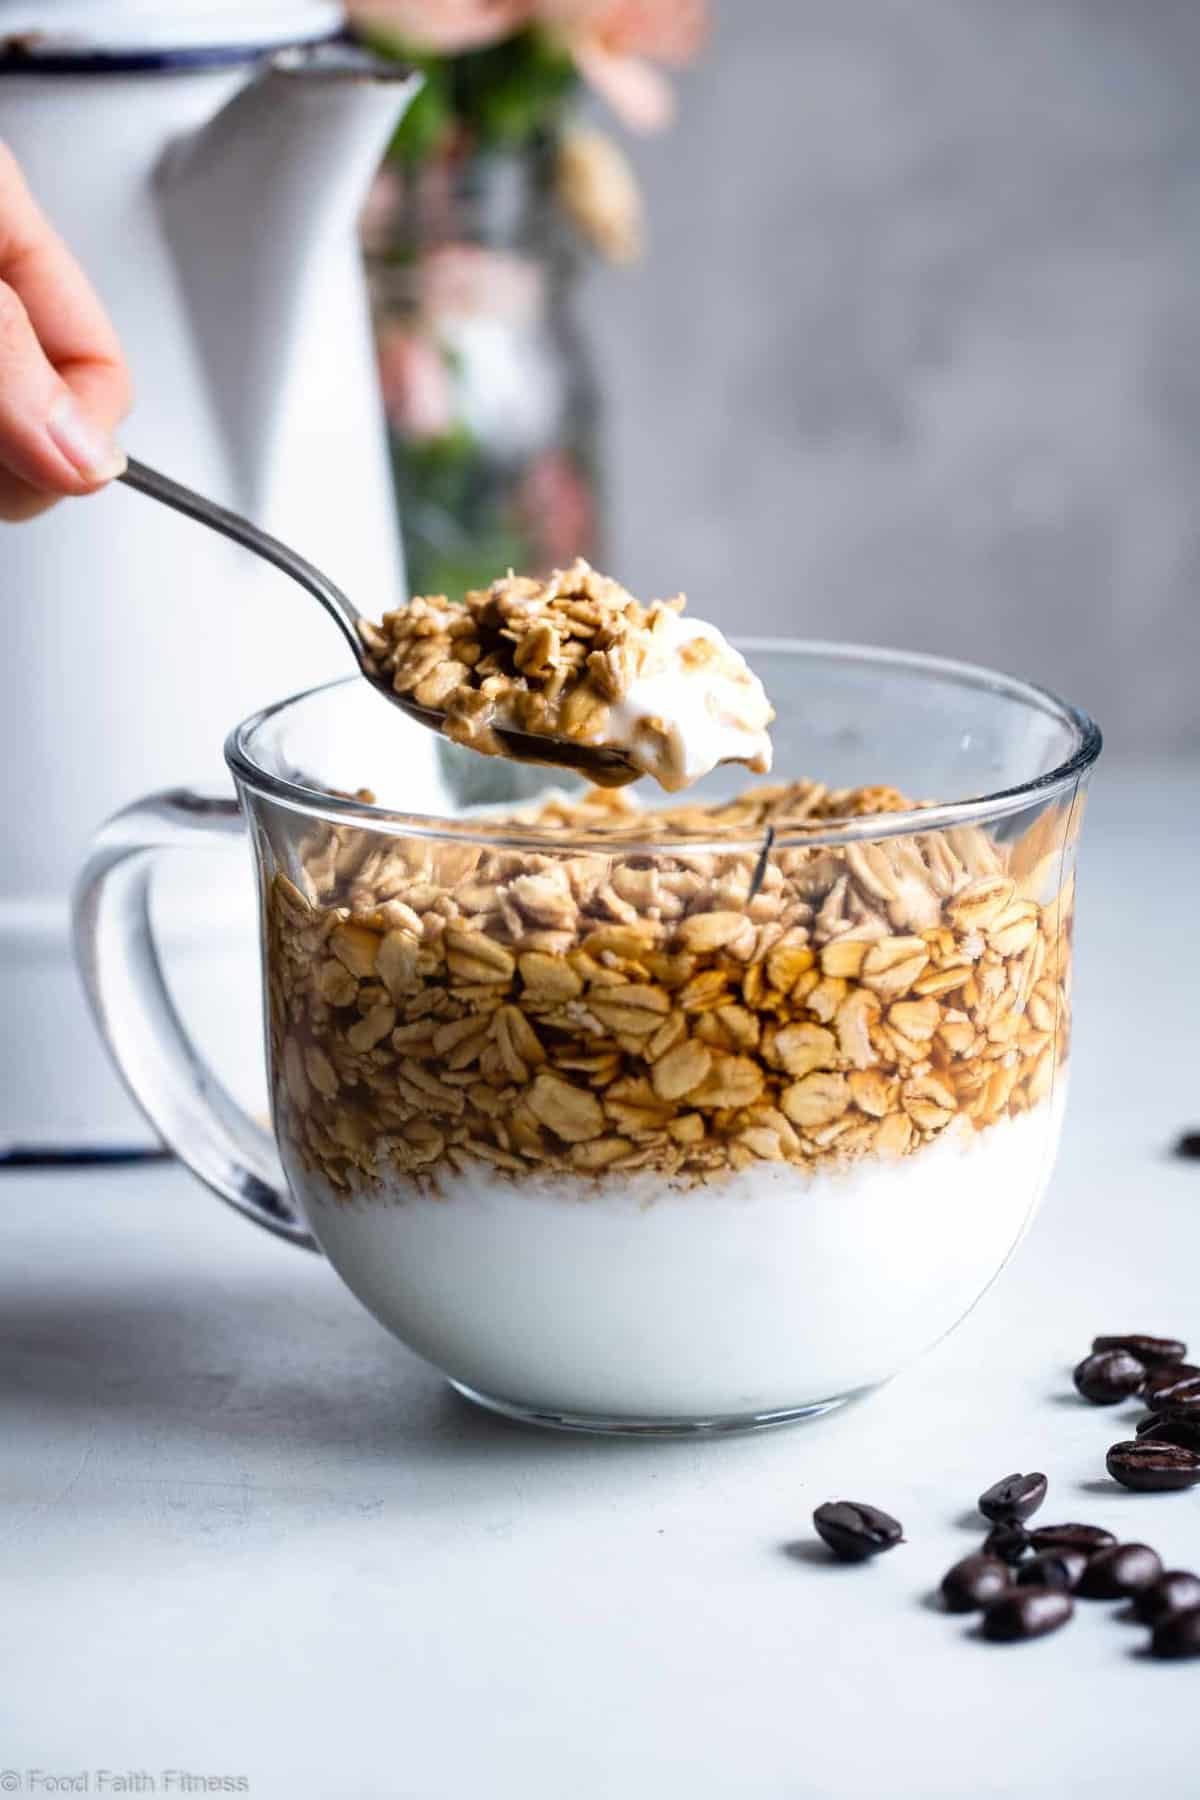 Vanilla Latte Overnight Oats - These gluten free overnight oats with Greek yogurt are a simple, 5 ingredient and protein packed way to start your day! Make them ahead for easy mornings! | #Foodfaithfitness | #glutenfree #healthy #breakfast #Greekyogurt #overnightoats